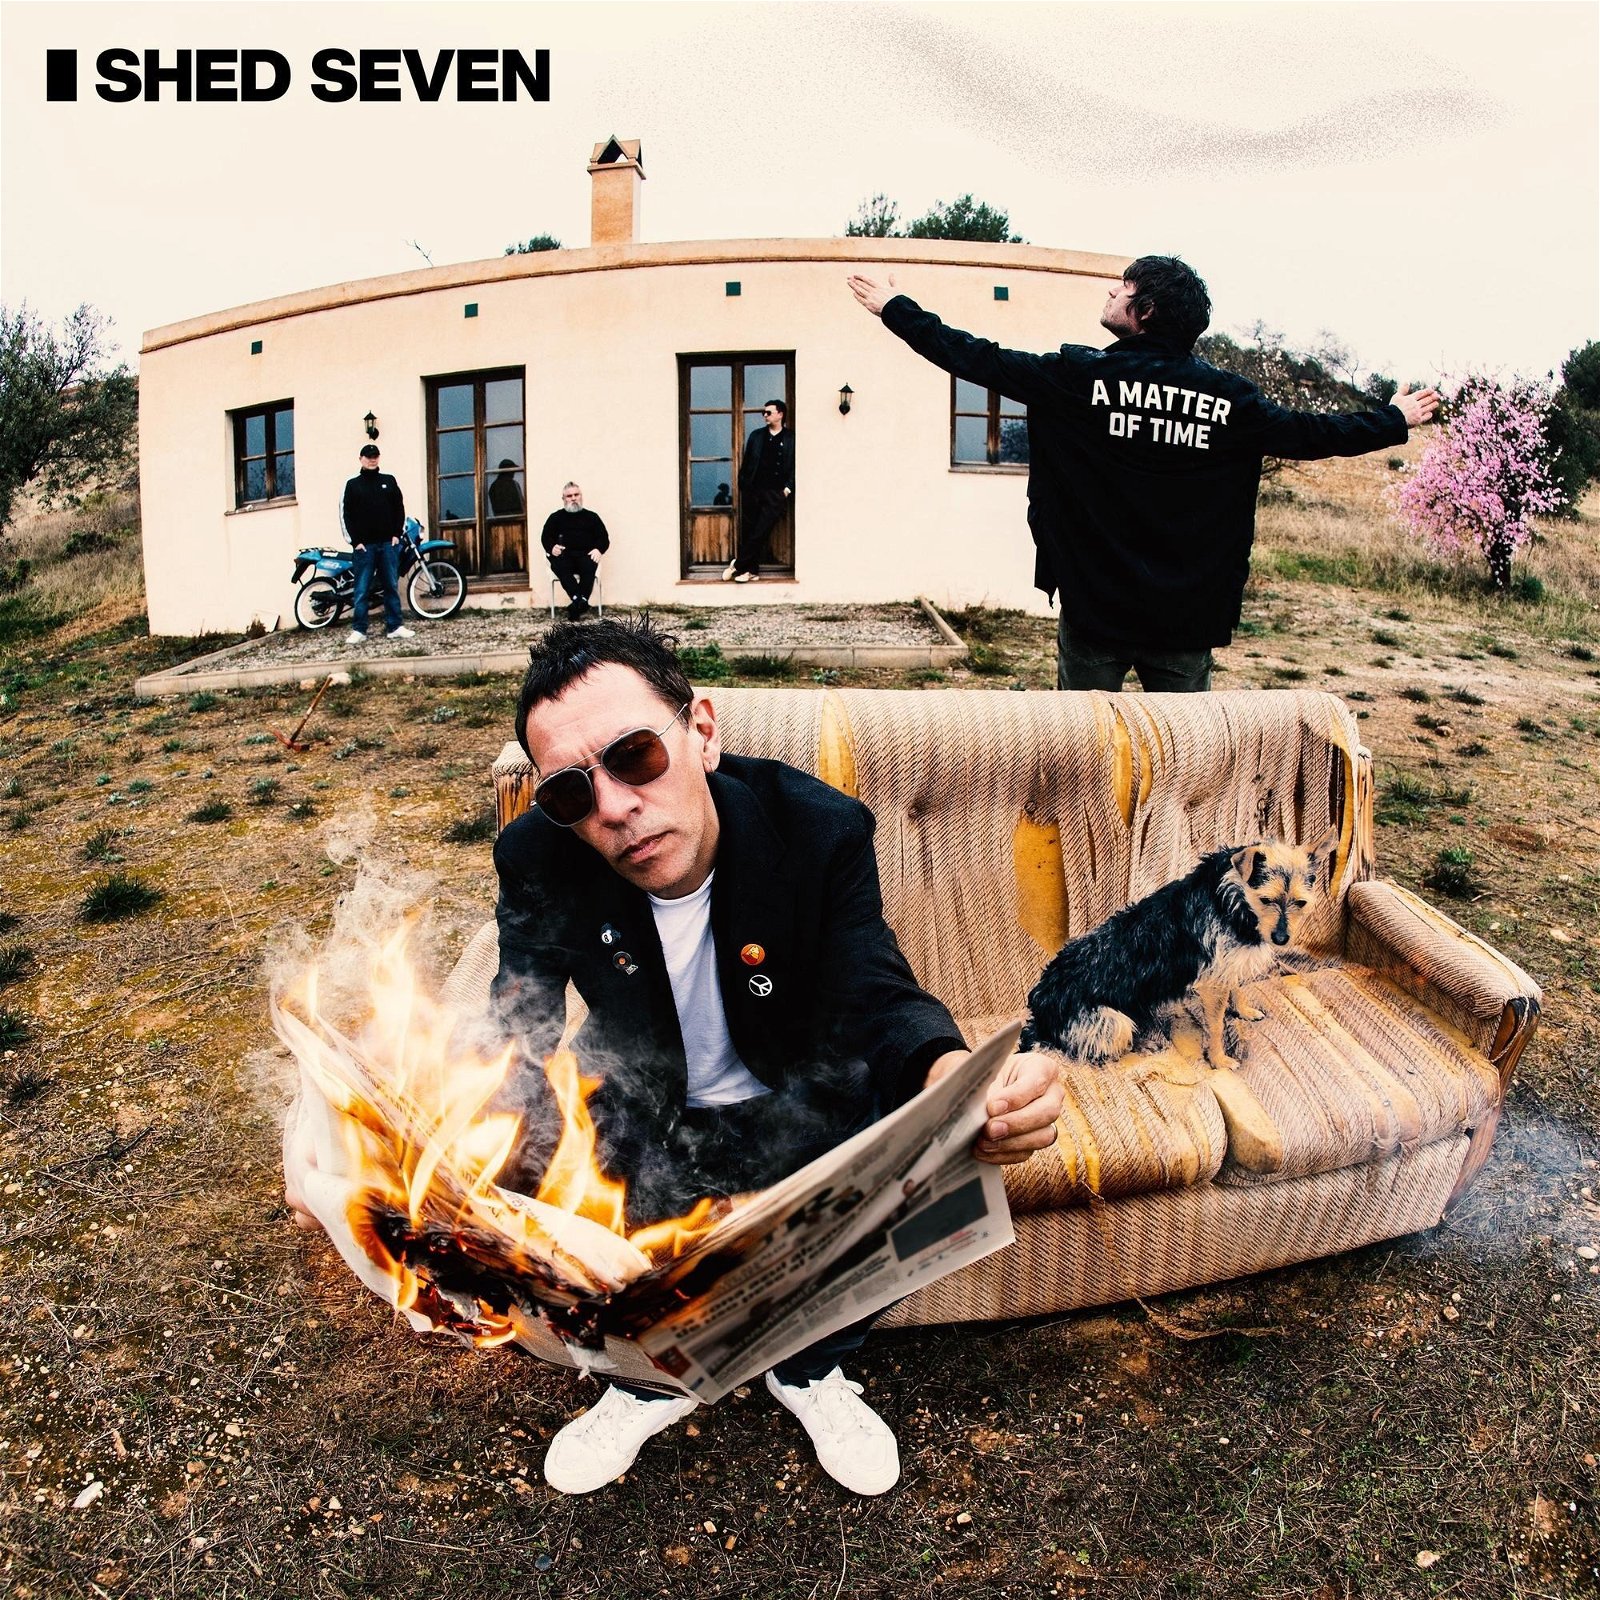 CD Shop - SHED SEVEN A MATTER OF TIME DELUXE LTD